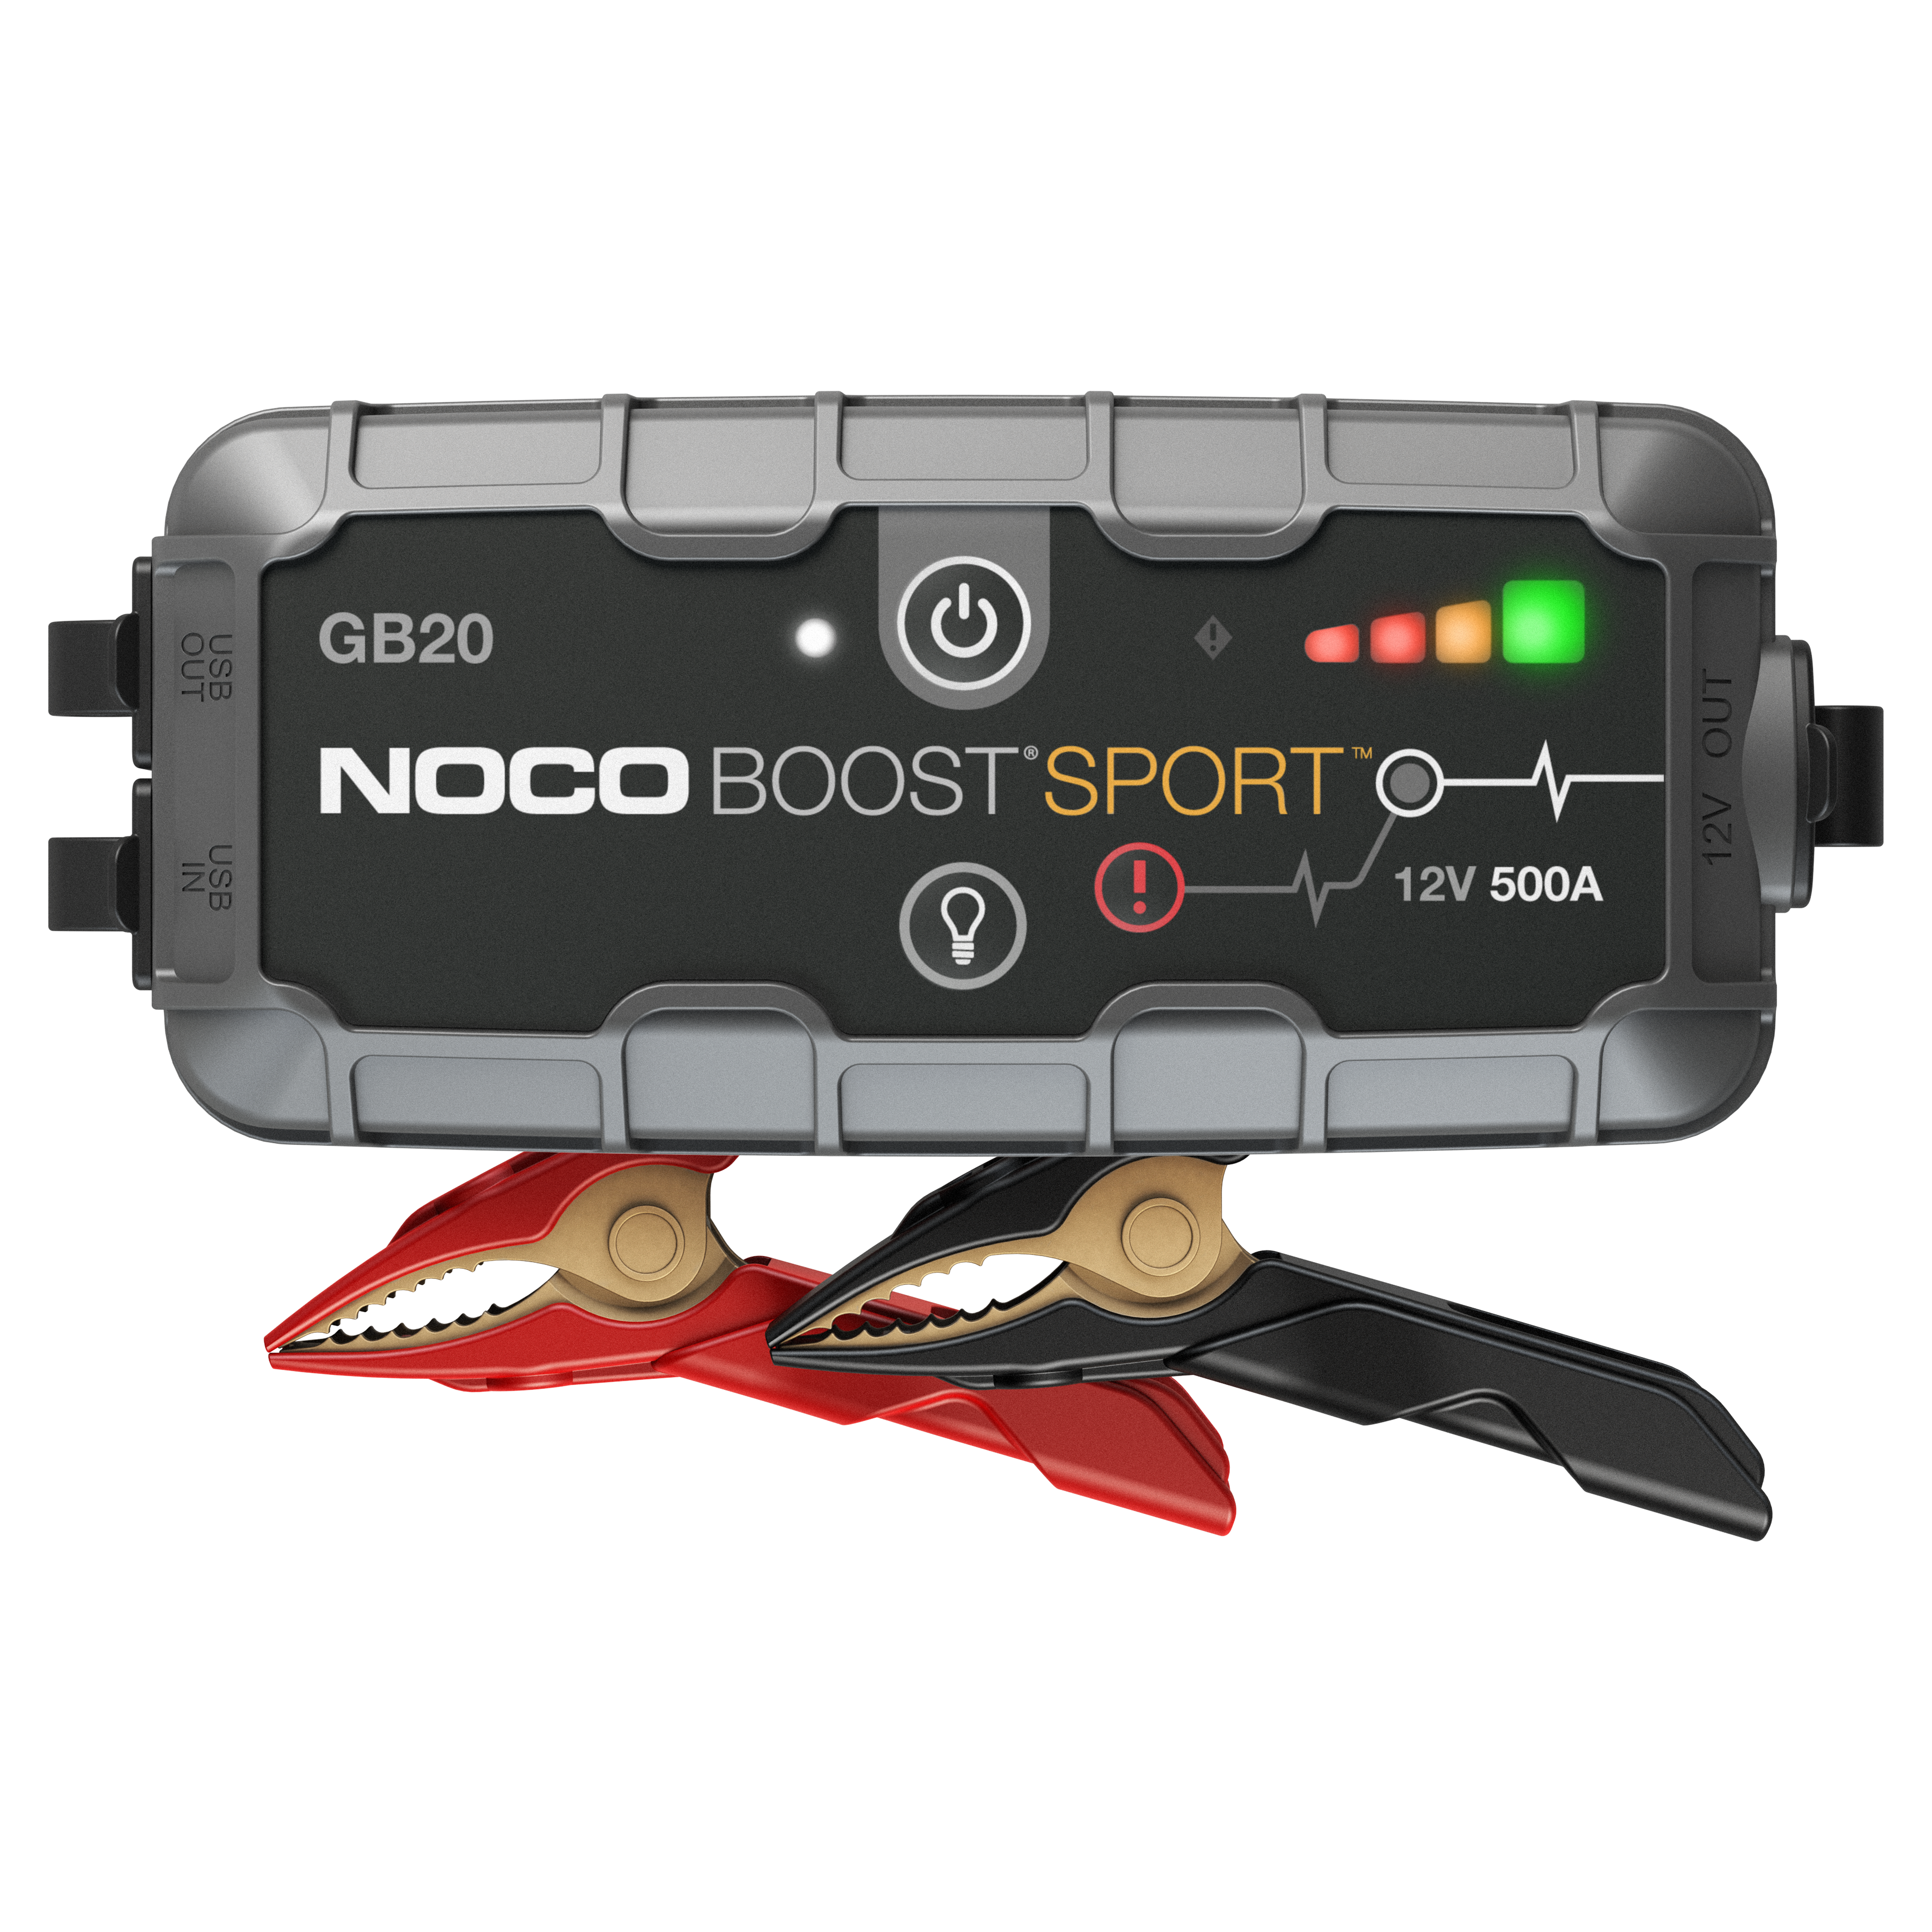 Noco Boost Sport GB20 booster jump starter starting aid power bank